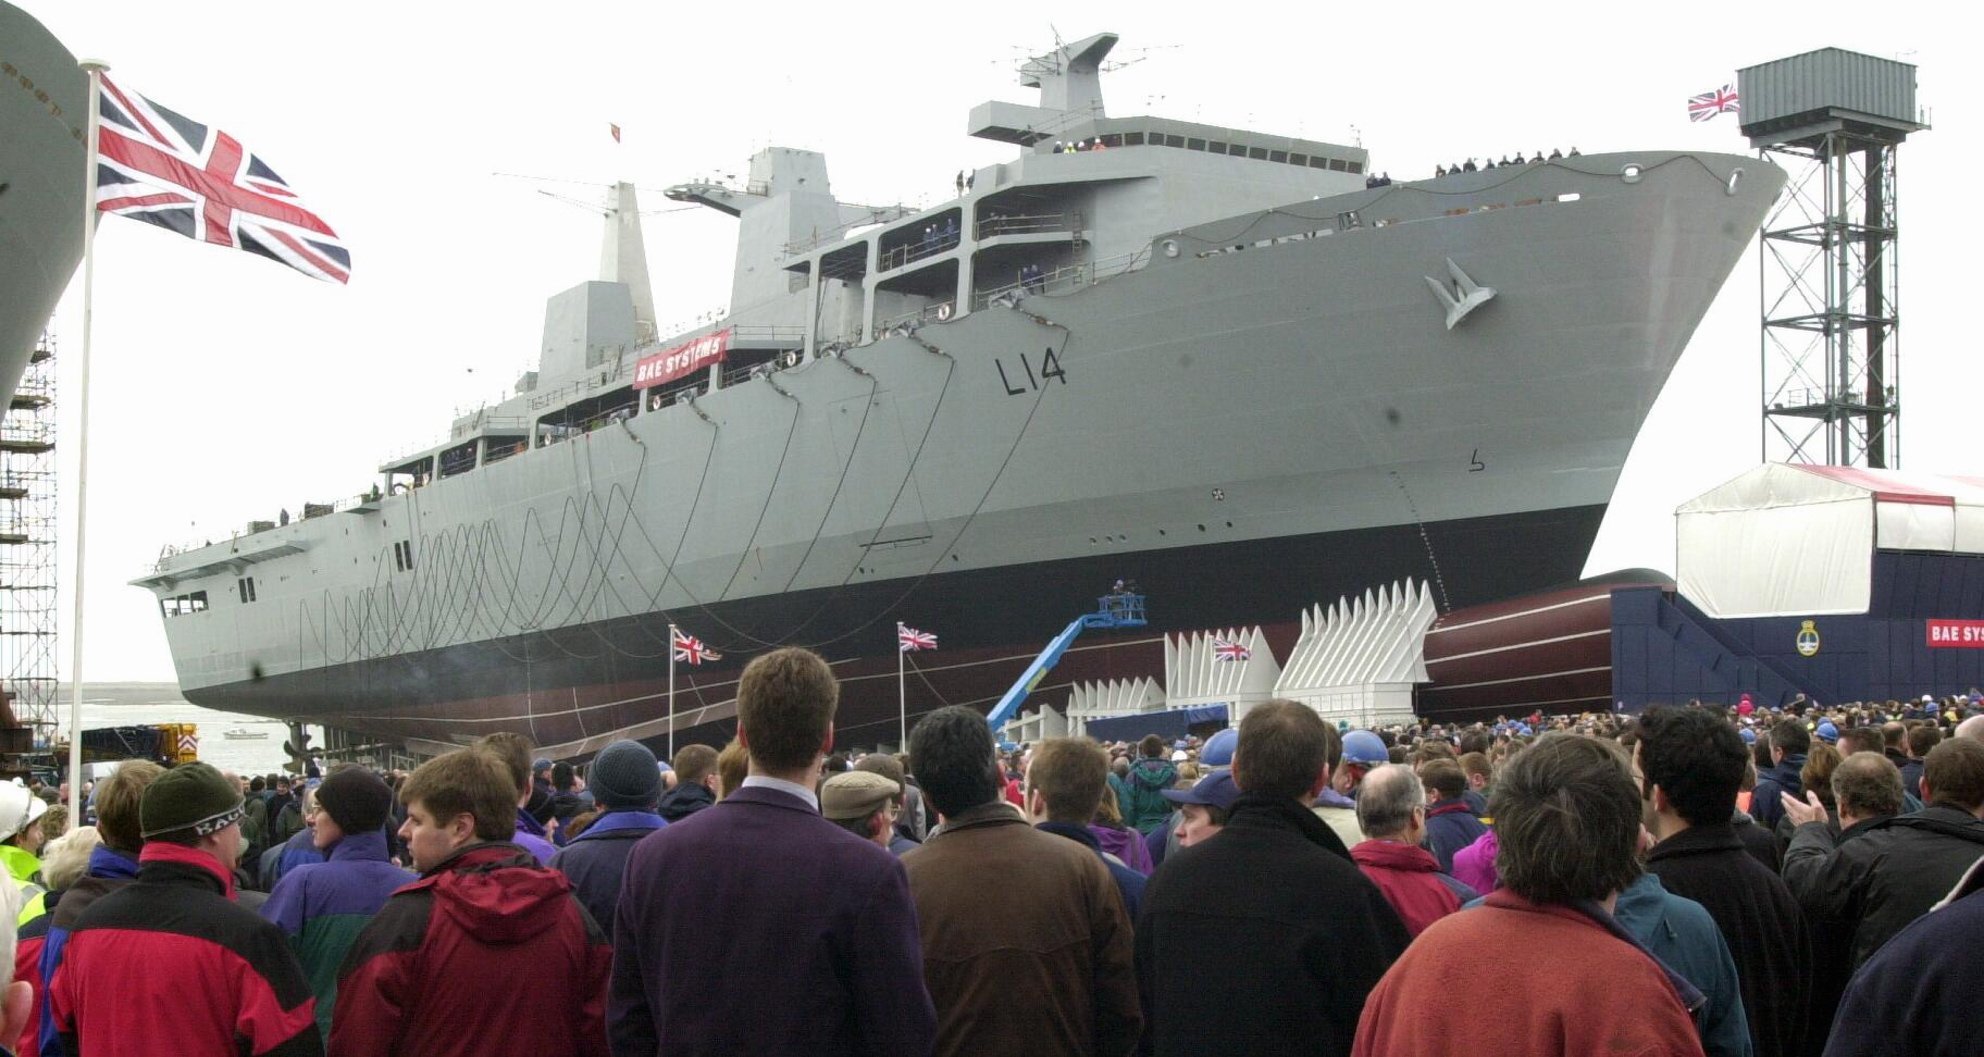 Launch of the Landing Platform Dock HMS Albion .Pic: Crowds gather for the naming and launch of Albion.RICHARD ENGLISH REF: 0079624.